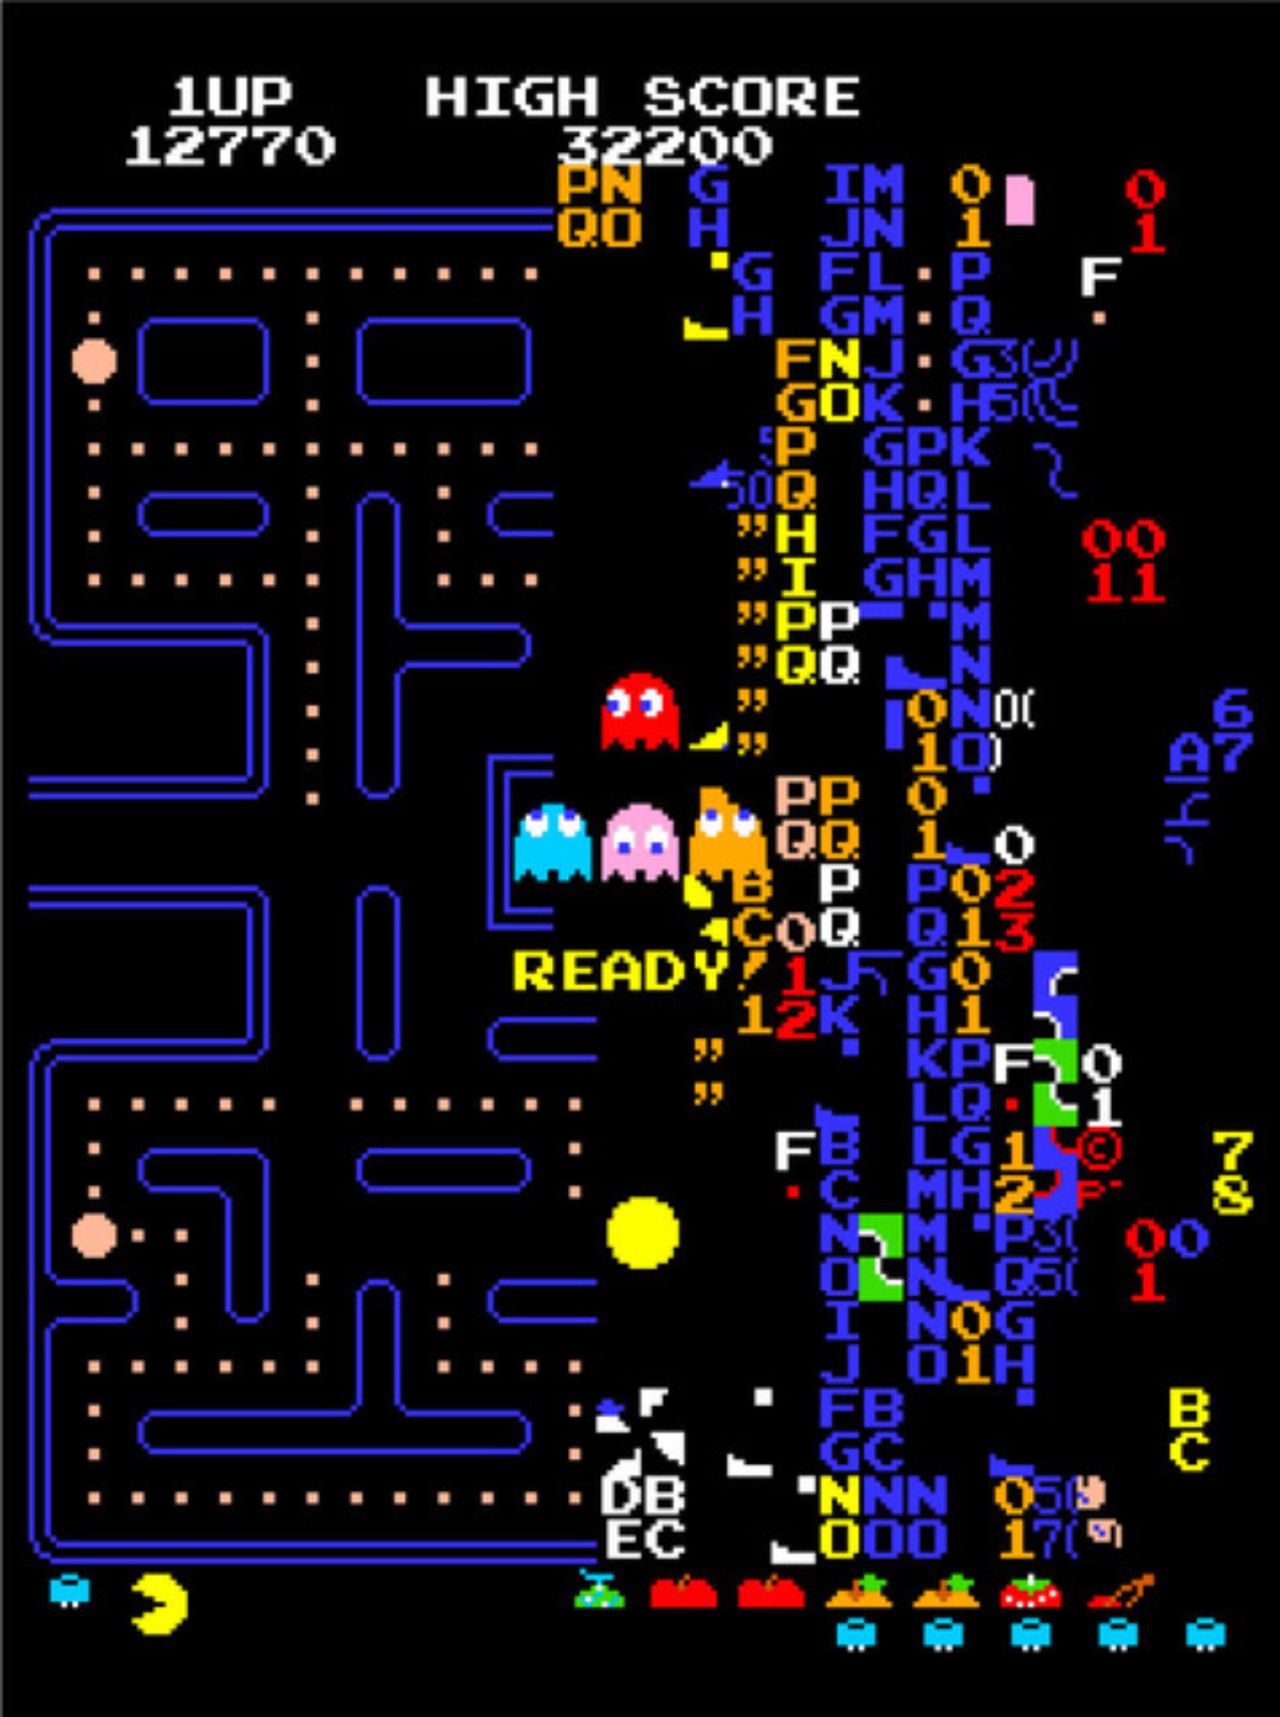 Billy Mitchell reached the final level of "Pac-Man" in 1999. Unfortunately, at that point, the game ran out of memory and could no longer draw a complete board.